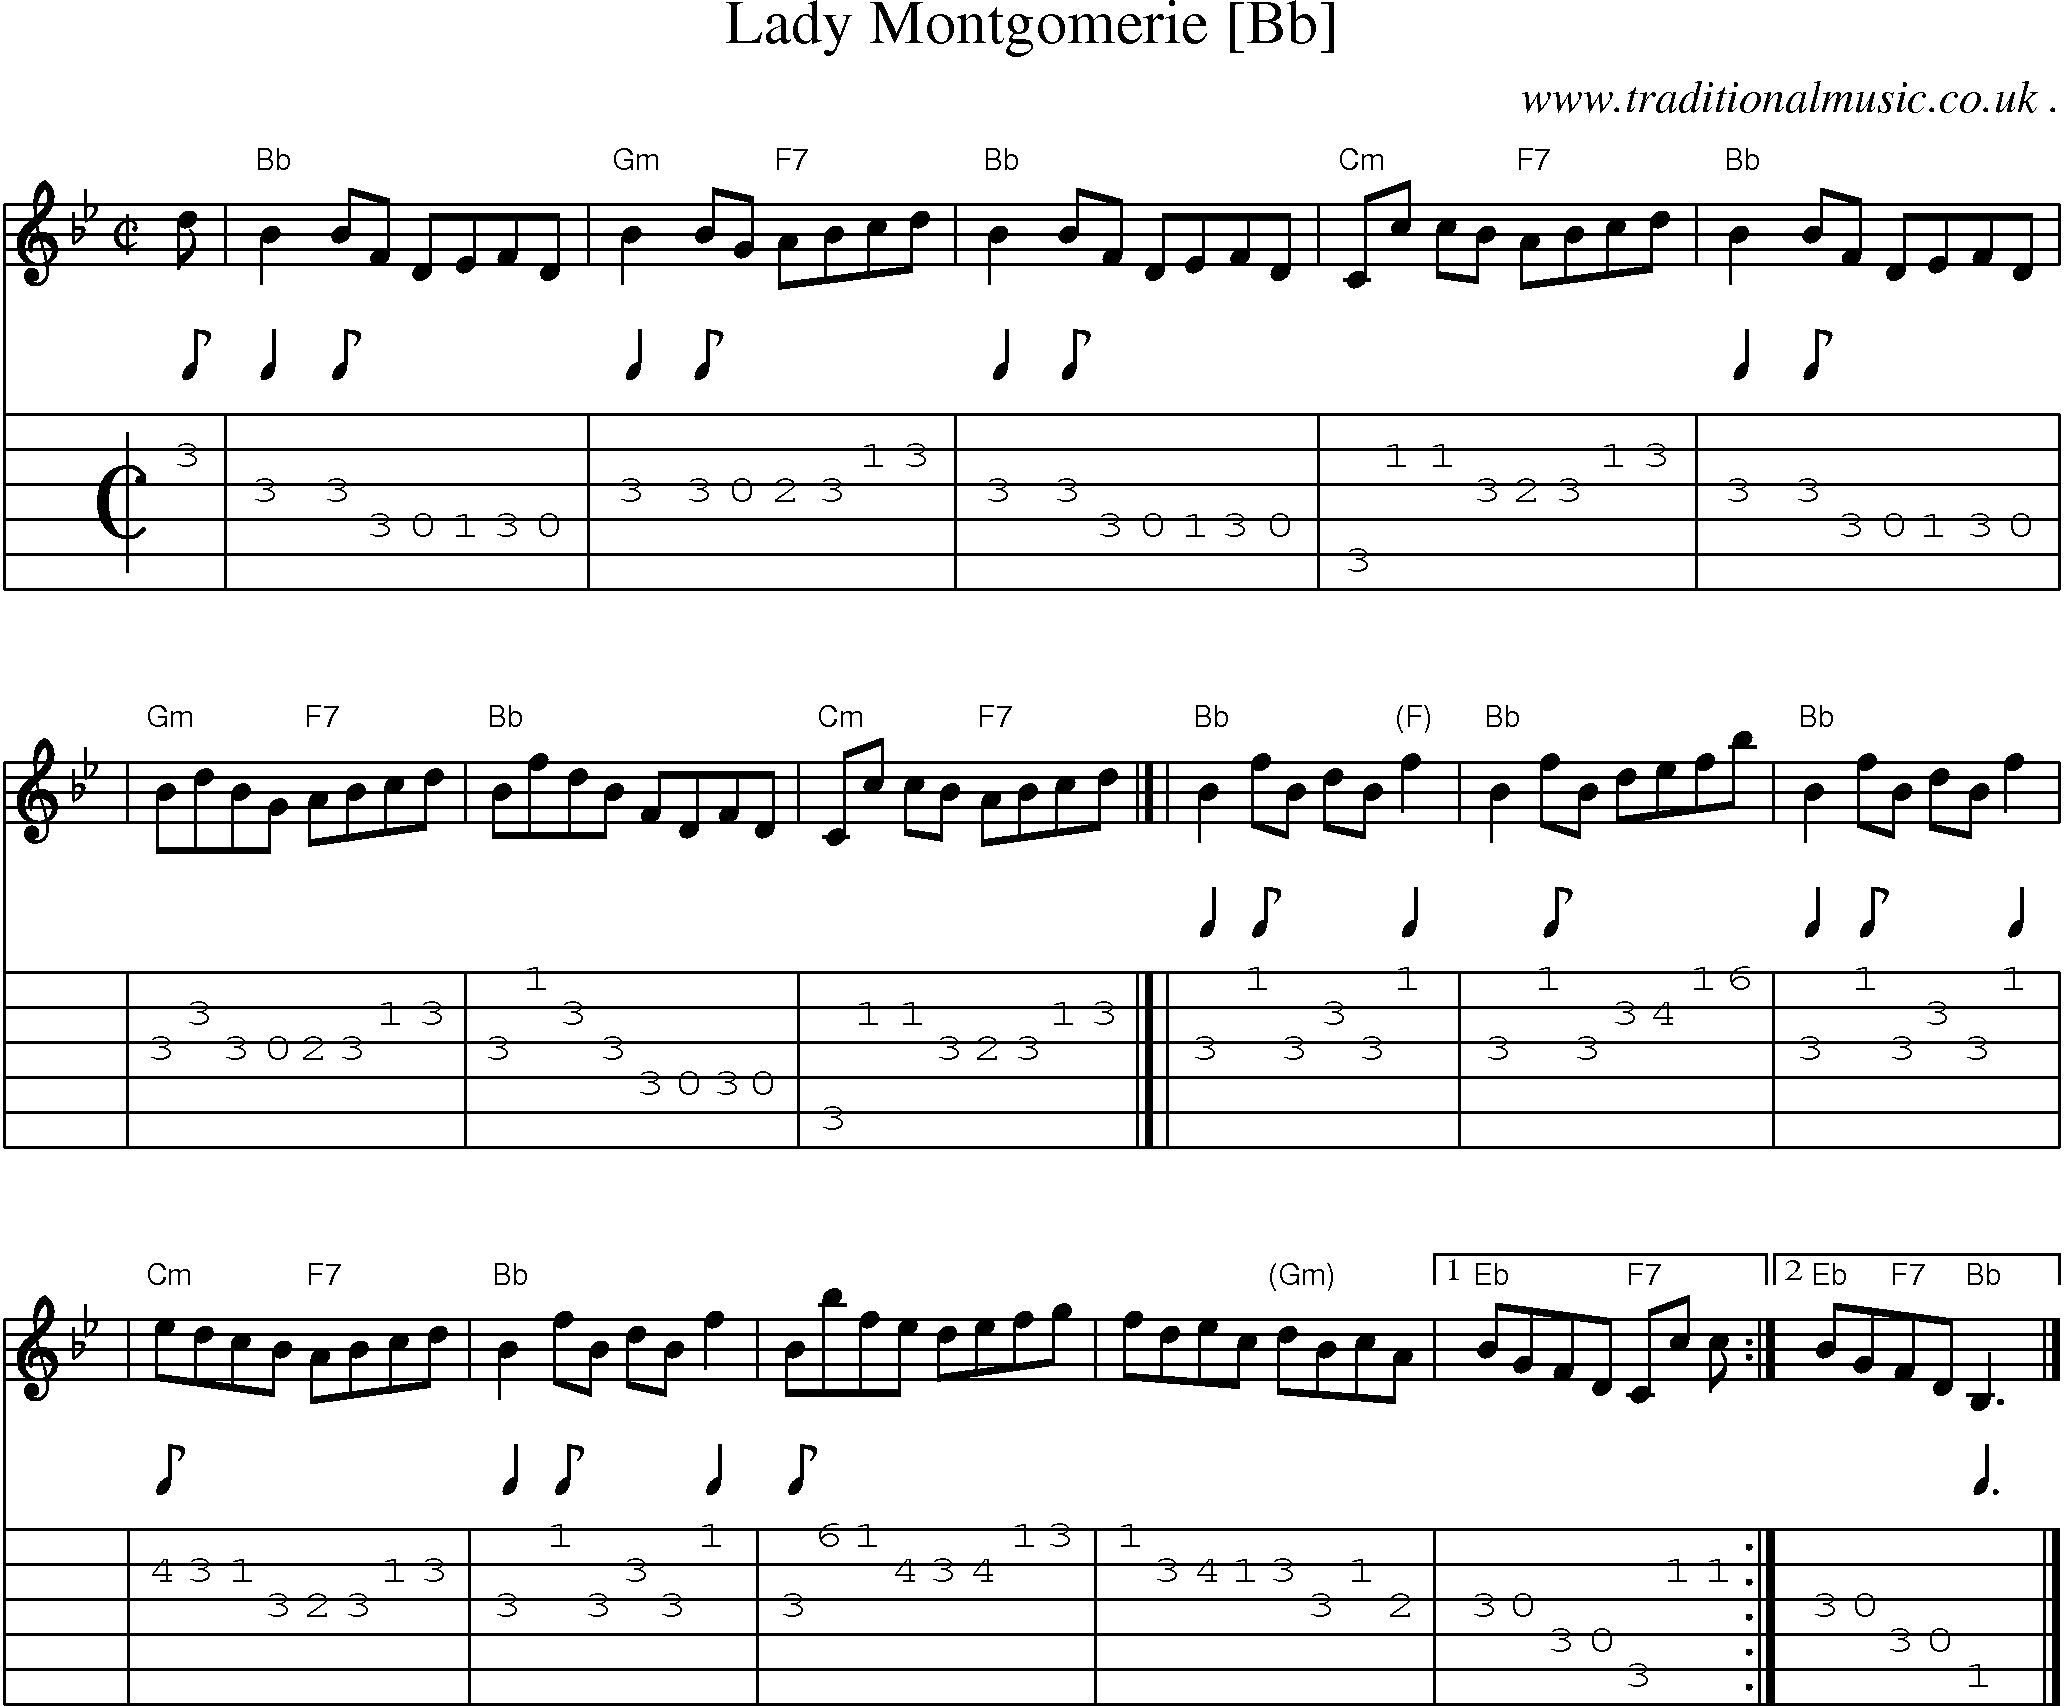 Sheet-music  score, Chords and Guitar Tabs for Lady Montgomerie [bb]